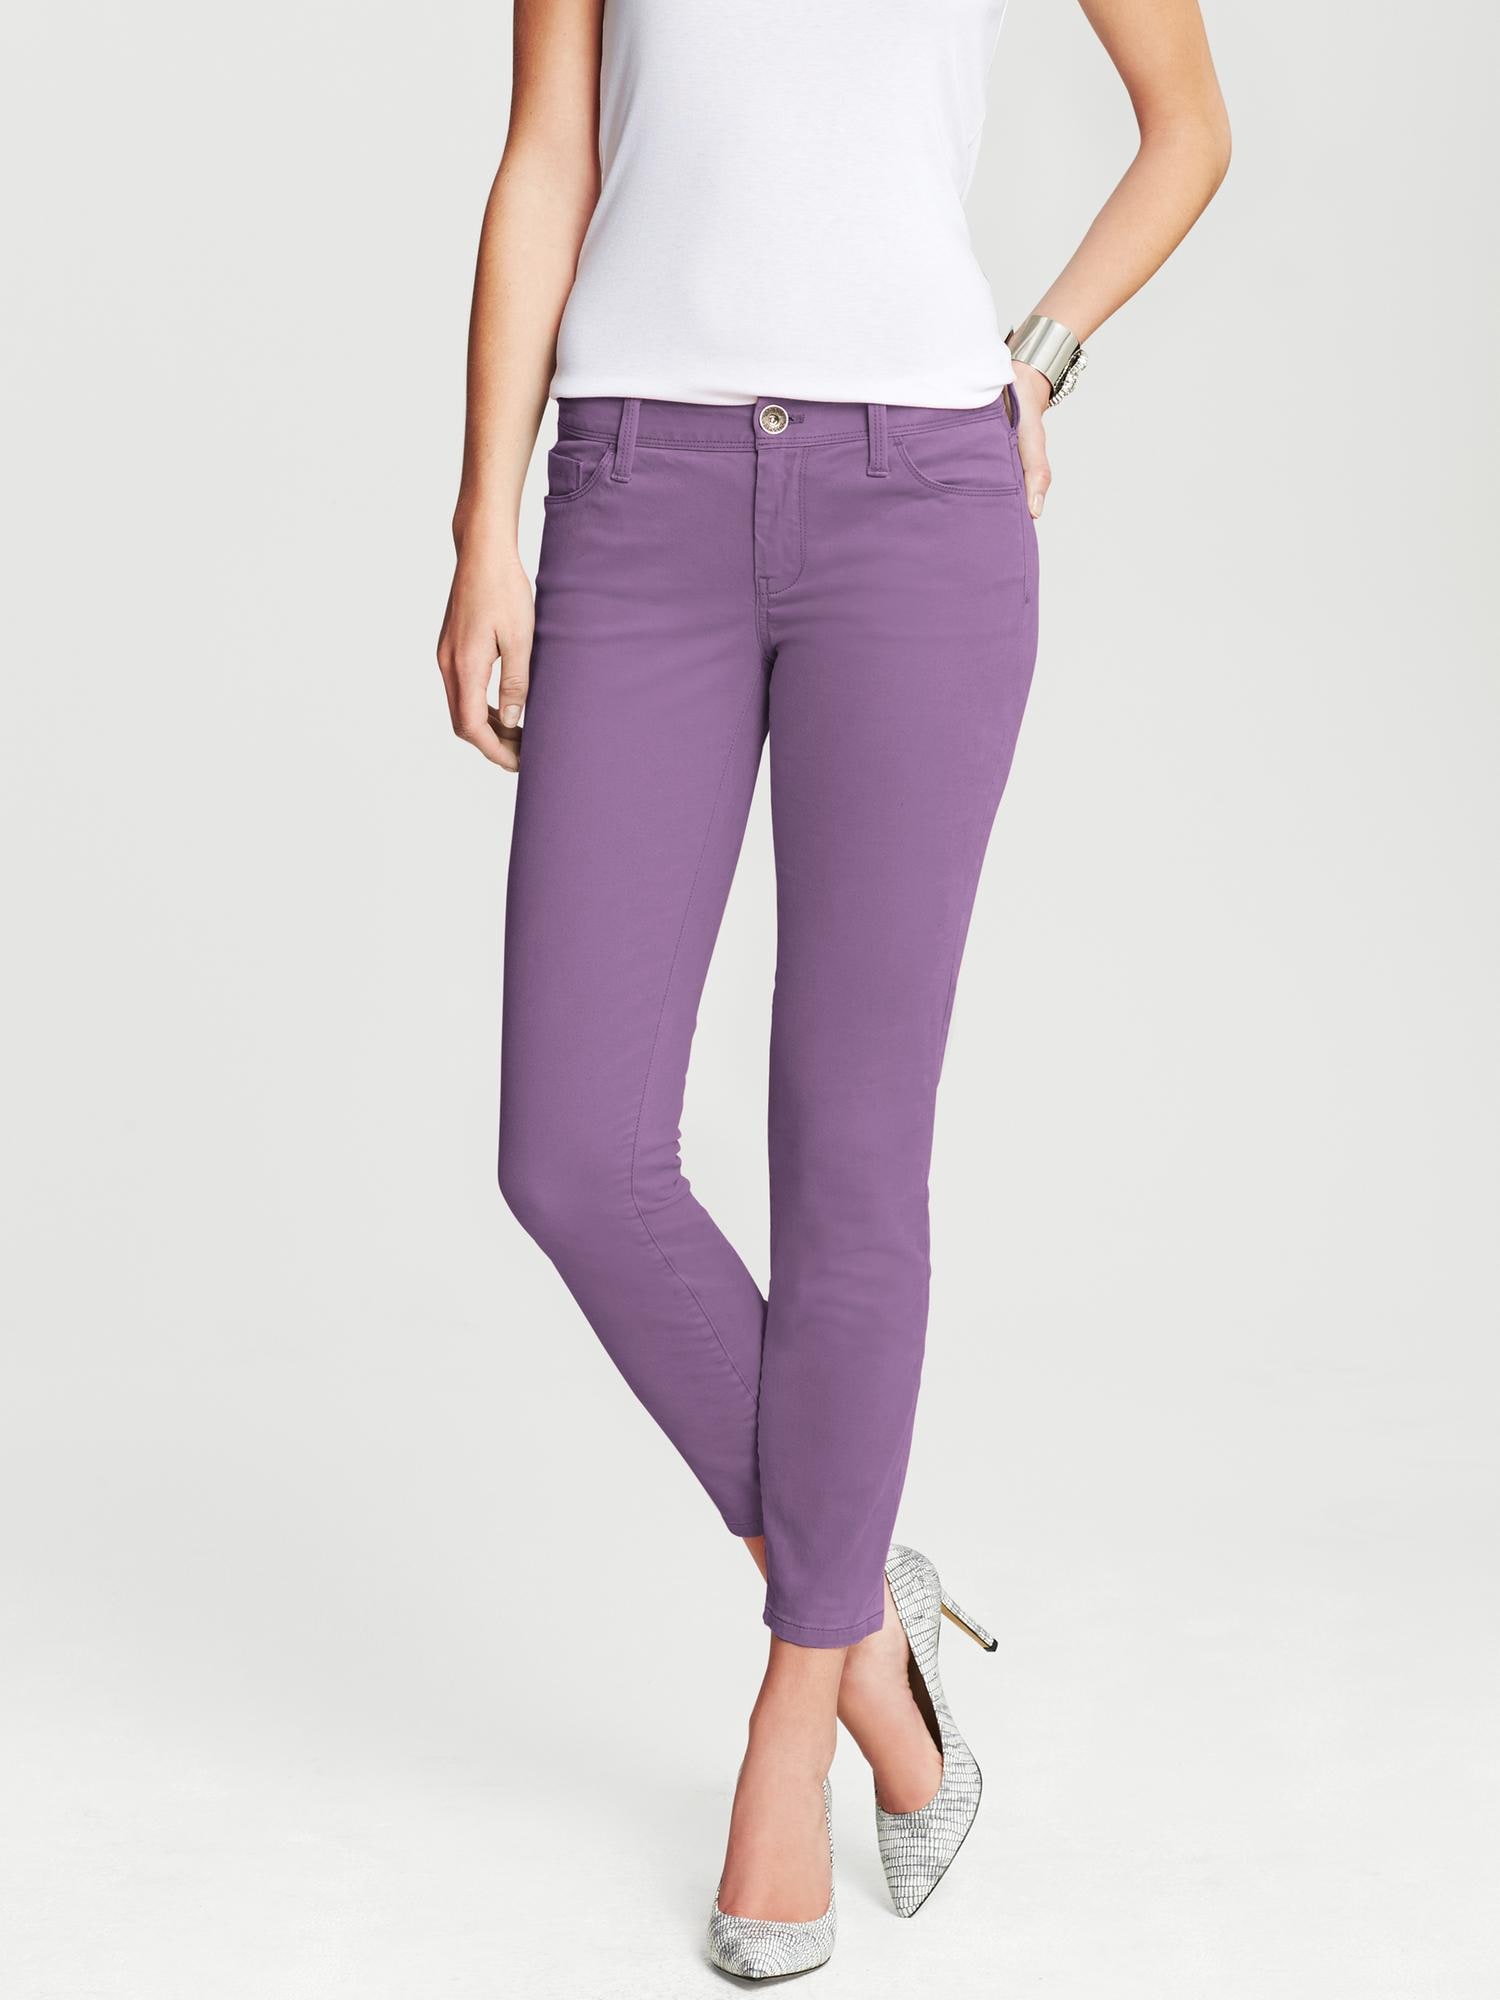 Twill Skinny Ankle Pant